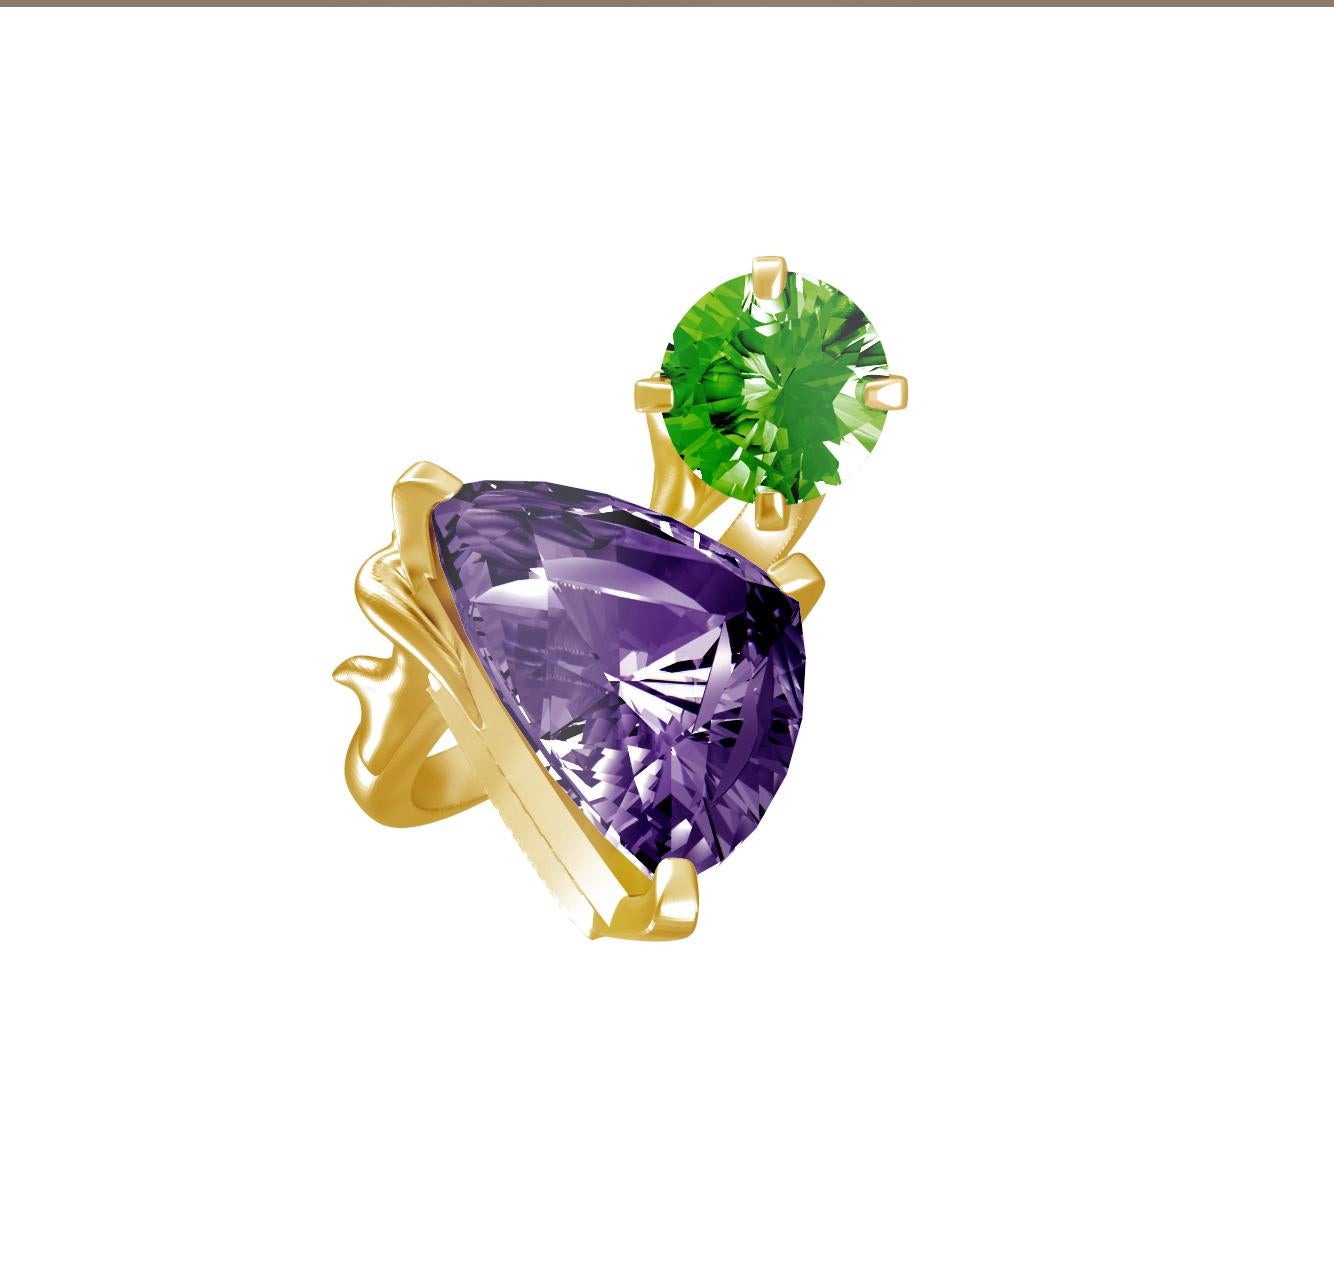 This contemporary fashion cluster ring is made of 18 karat rose gold with trillion cut amethyst and green round cut quartz. The unusual angle of the gems placement makes it look even bigger, as a perfect cocktail ring. 

The ring will be custom made